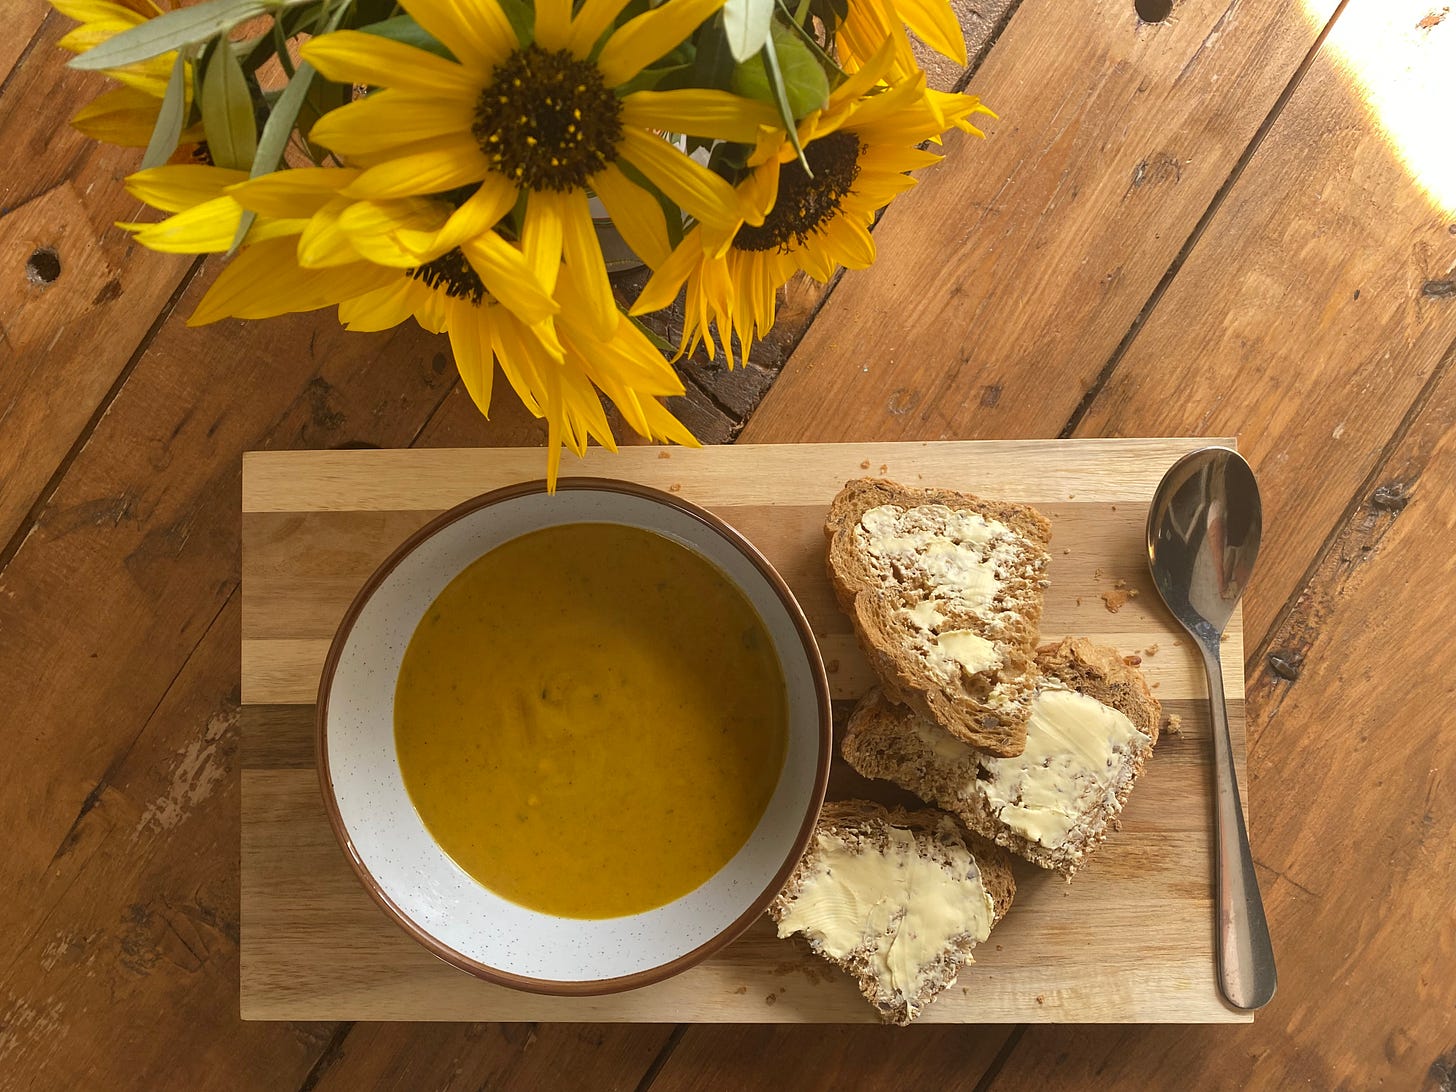 A bowl of soup on a wooden board, bread and butter to the side next to a spoon. Some yellow sunflowers are also on the table. 